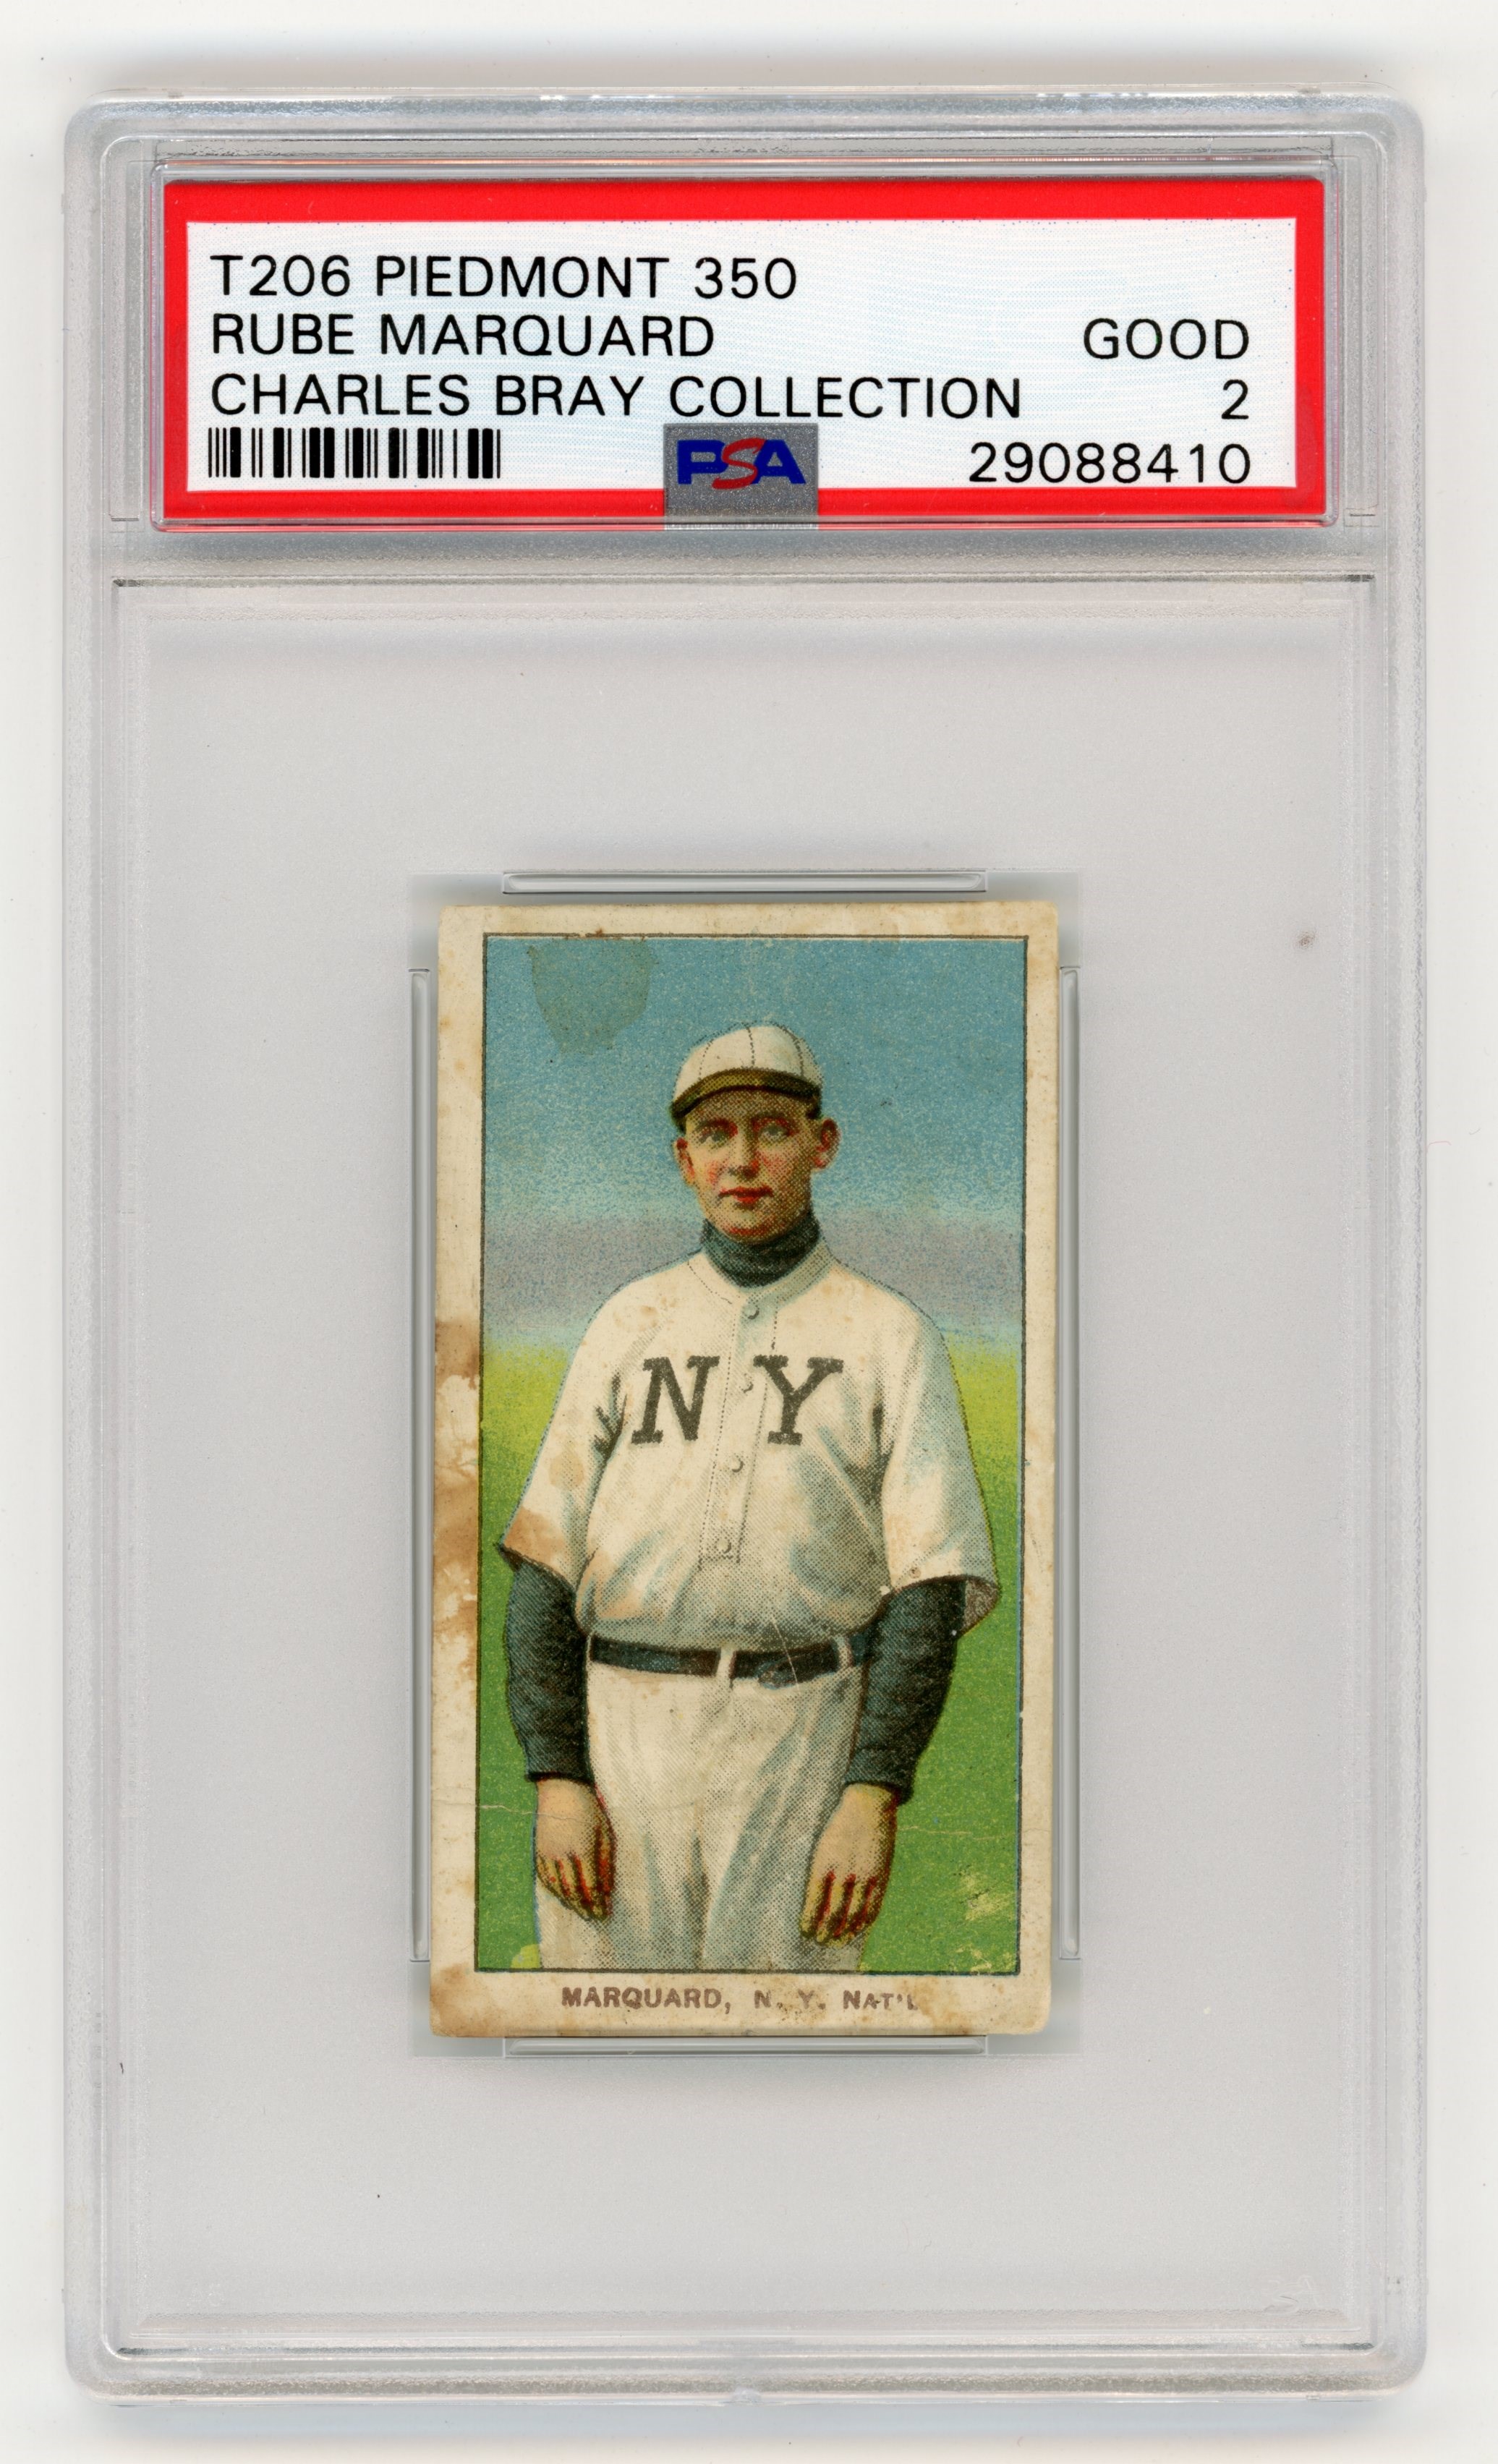 - T206 Piedmont 350 Rube Marquard PSA 2 From Charles Bray Collection